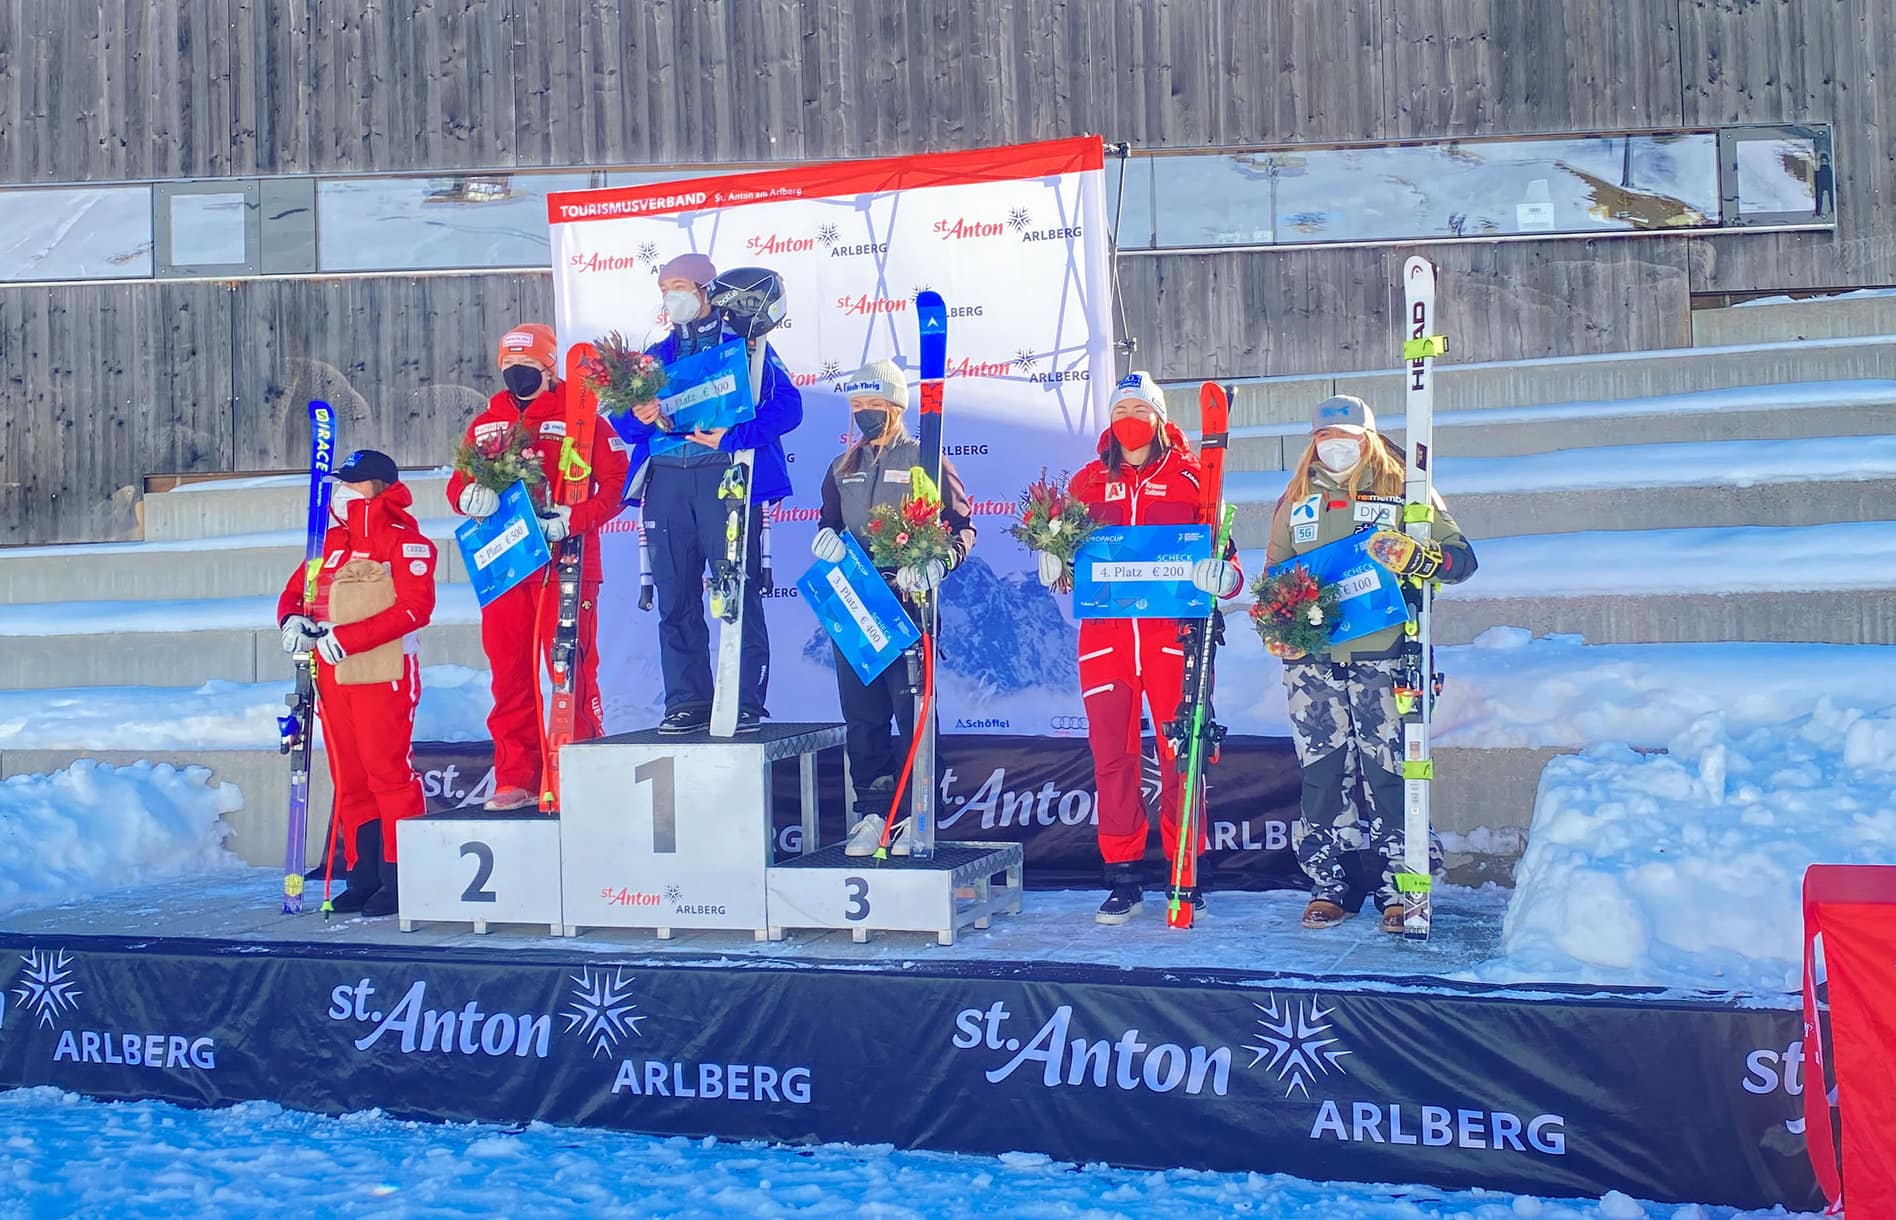 Price giving, Wednesday, 26.01.2022, St. Anton am Arlberg. From left to right: Viktoria Buergler (AUT, winner special price U18), Juliana Sutter (SUI, 2nd), Esther Paslier (FRA, 1st), Livia Rossi (SUI, 3rd), Lena Wechner (AUT,4th), Inni Holm Wembstad (NOR, 5th)